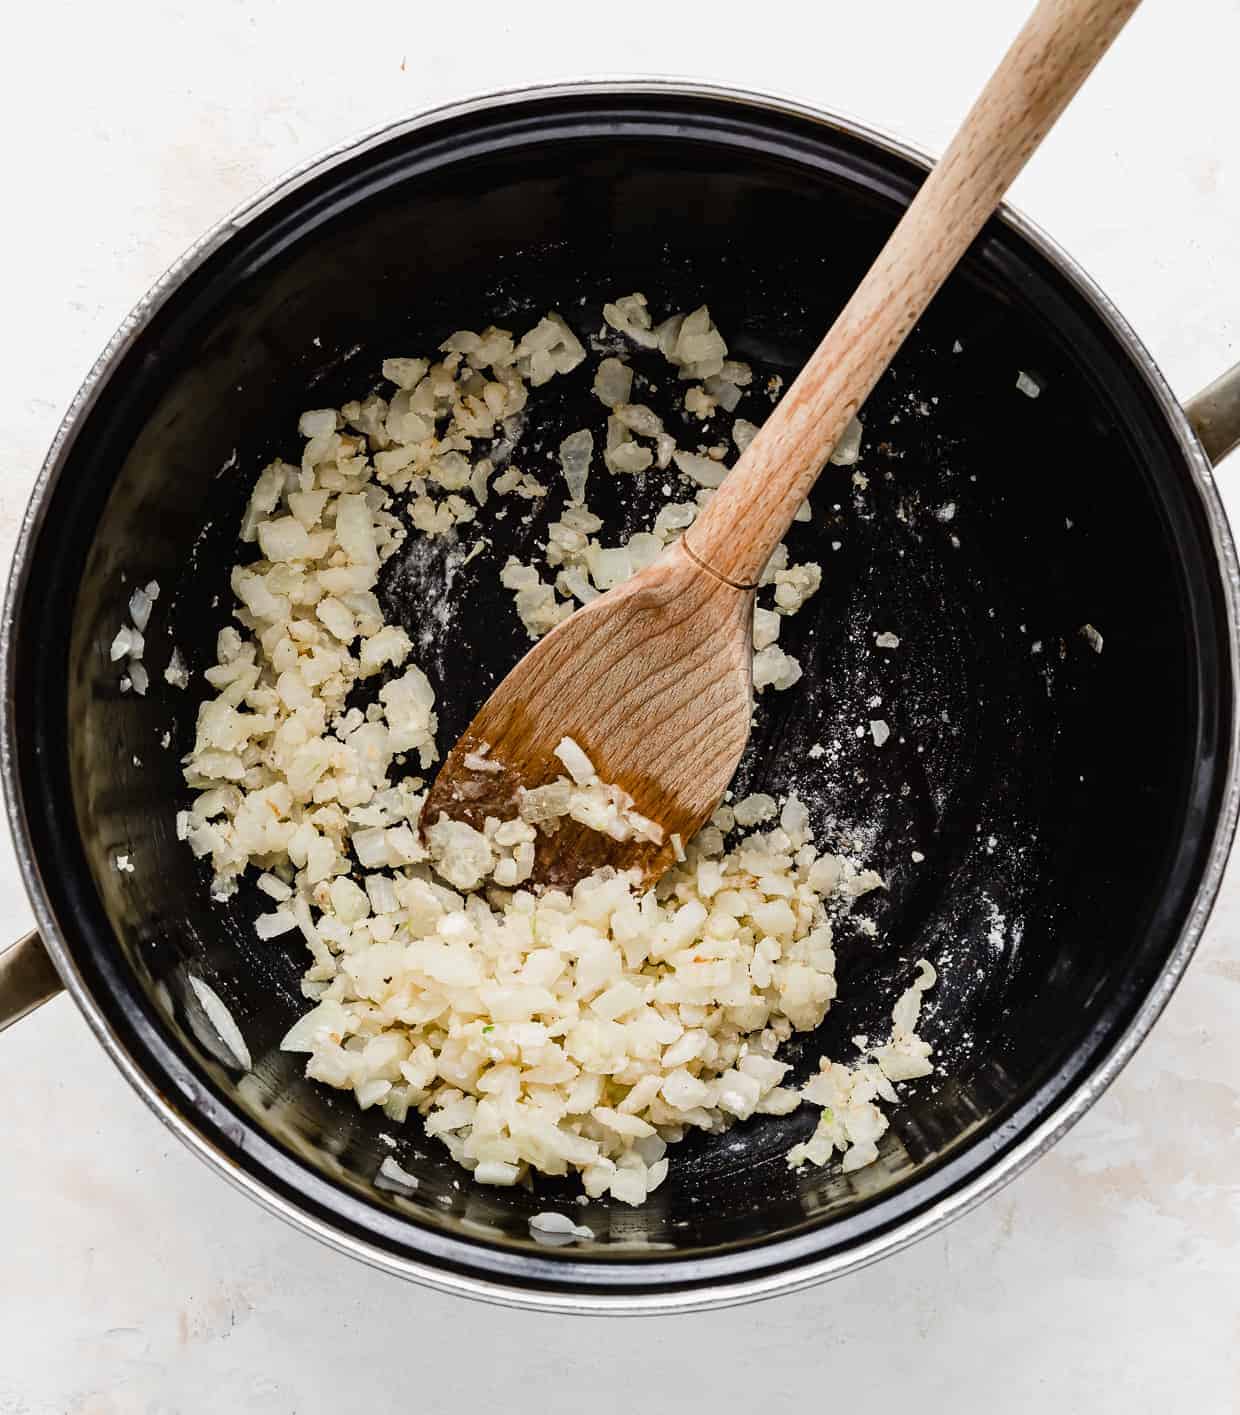 Diced onion mixed with flour in a black pot.